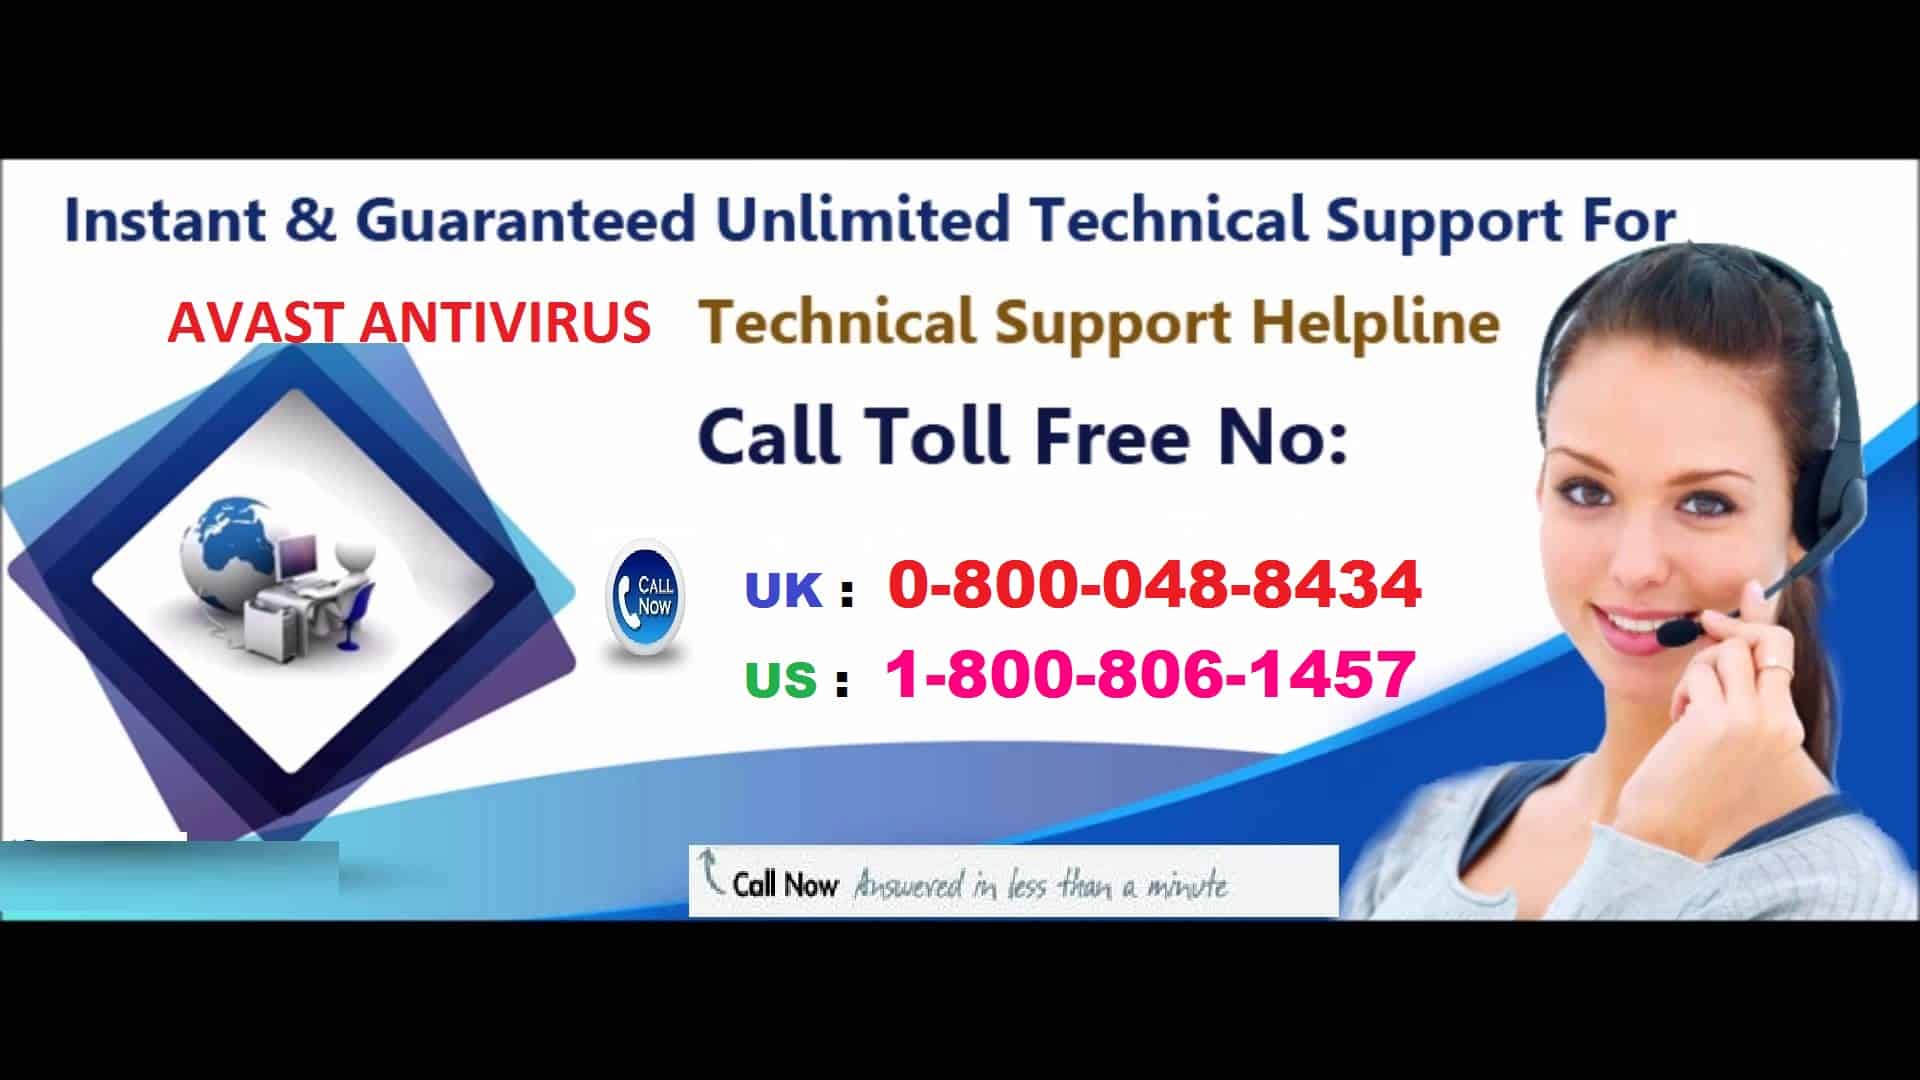 Dial Avast Antivirus Tech Support Phone Number when you need -DesignBump